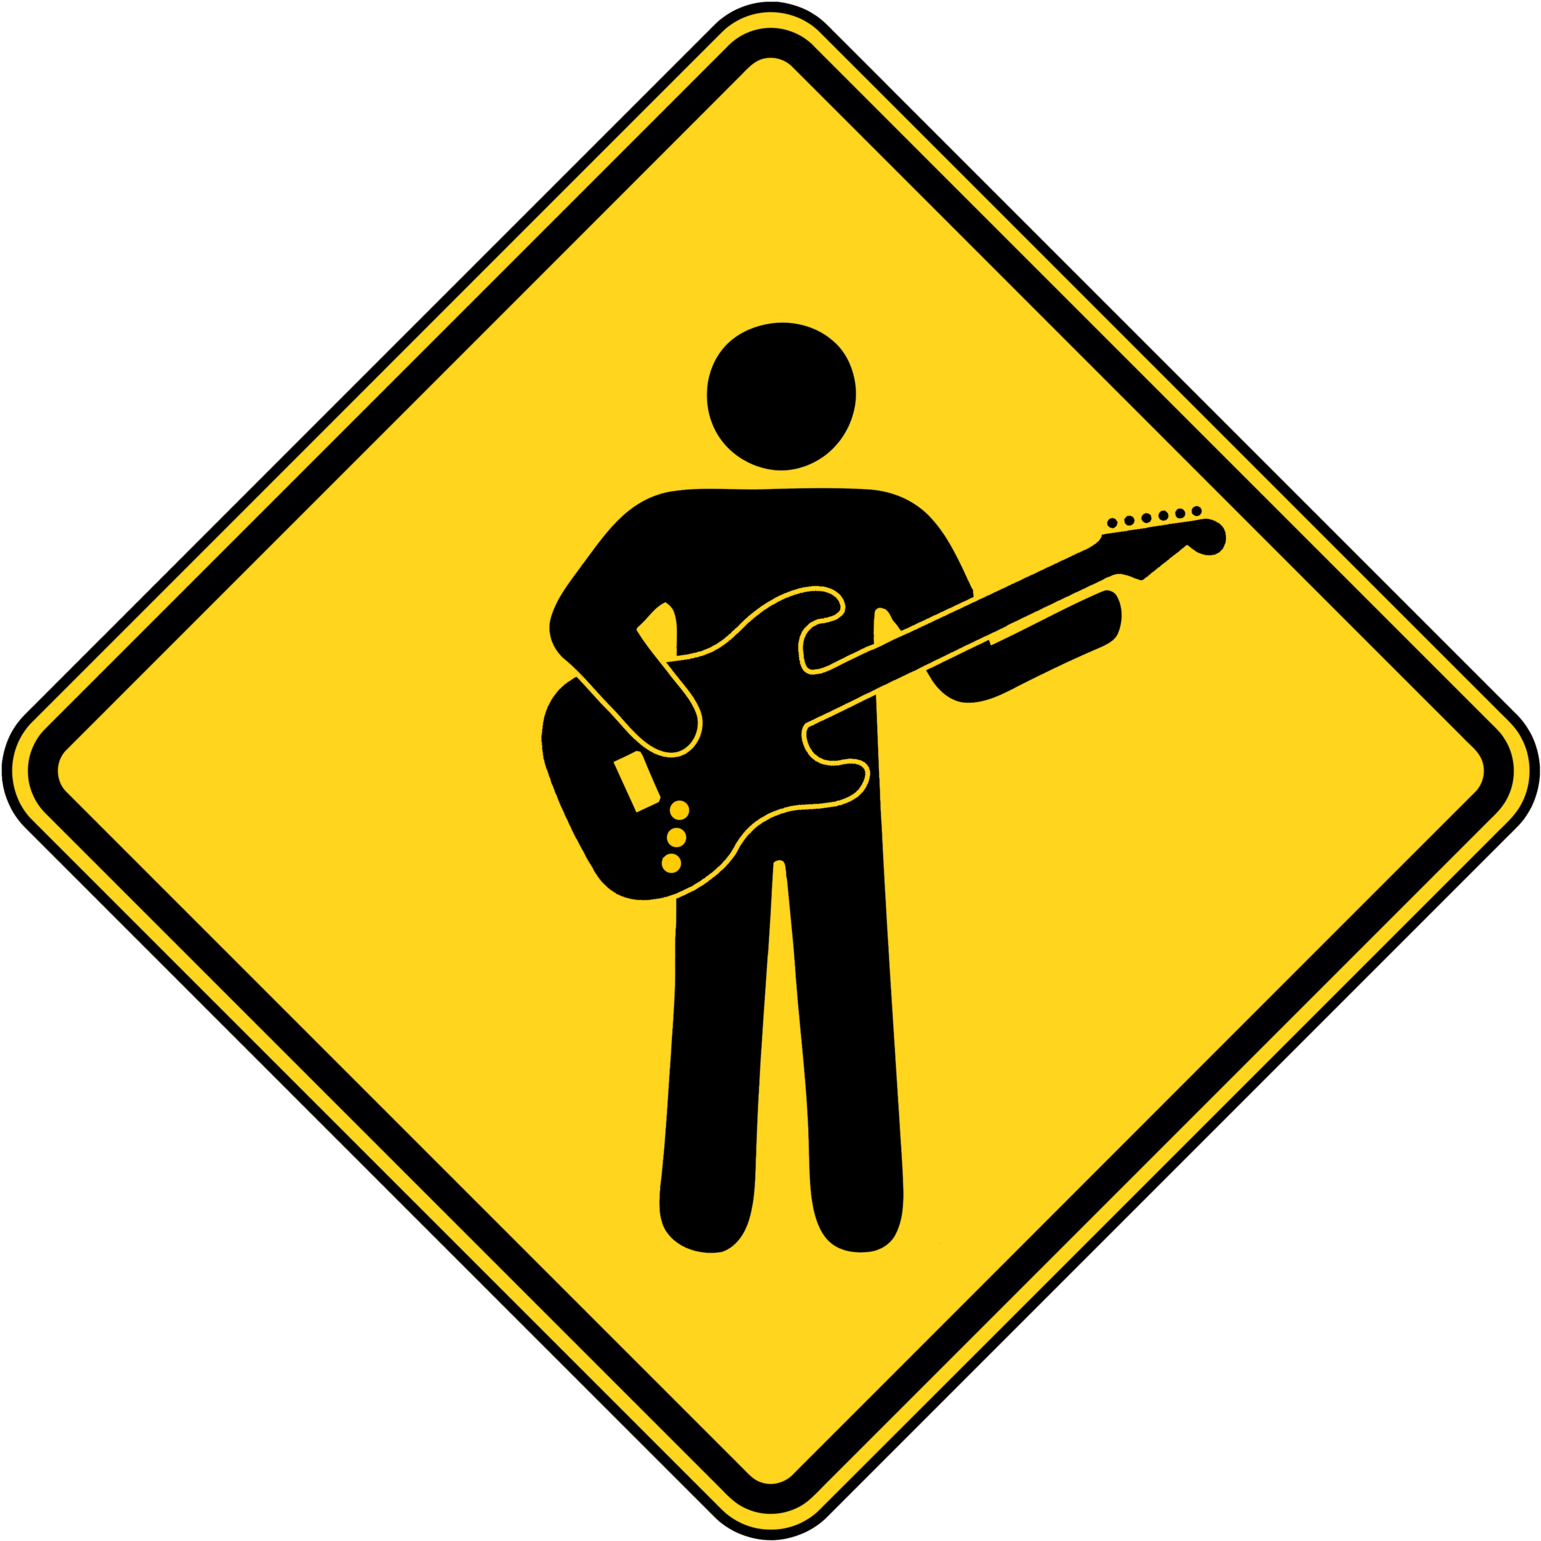 Electric Guitar Sign By Topher147 - Merging Lanes Sign (1600x1600)